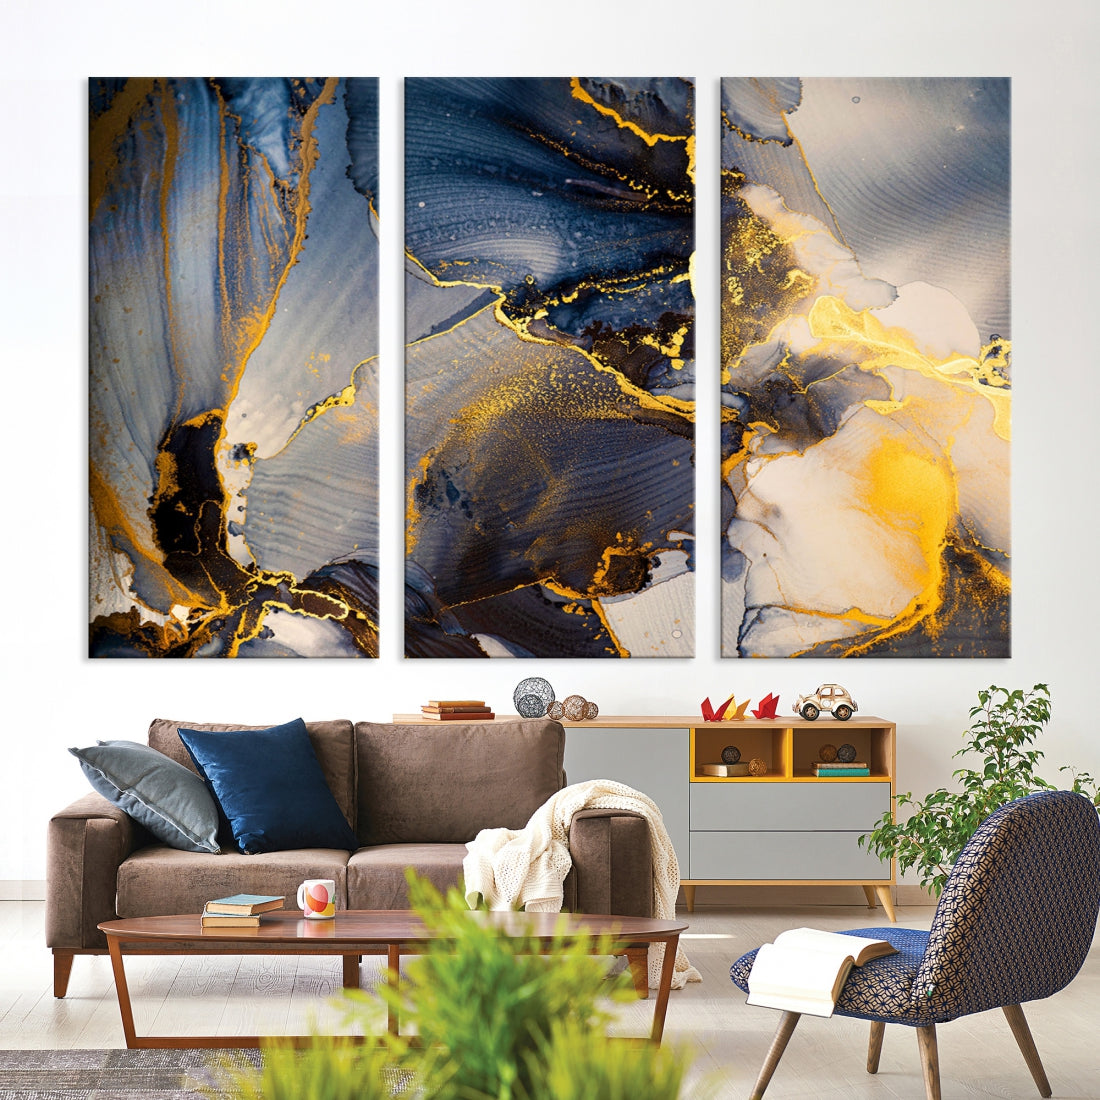 Blue and Gold Marble Modern Abstract Canvas Wall Art Giclee Print